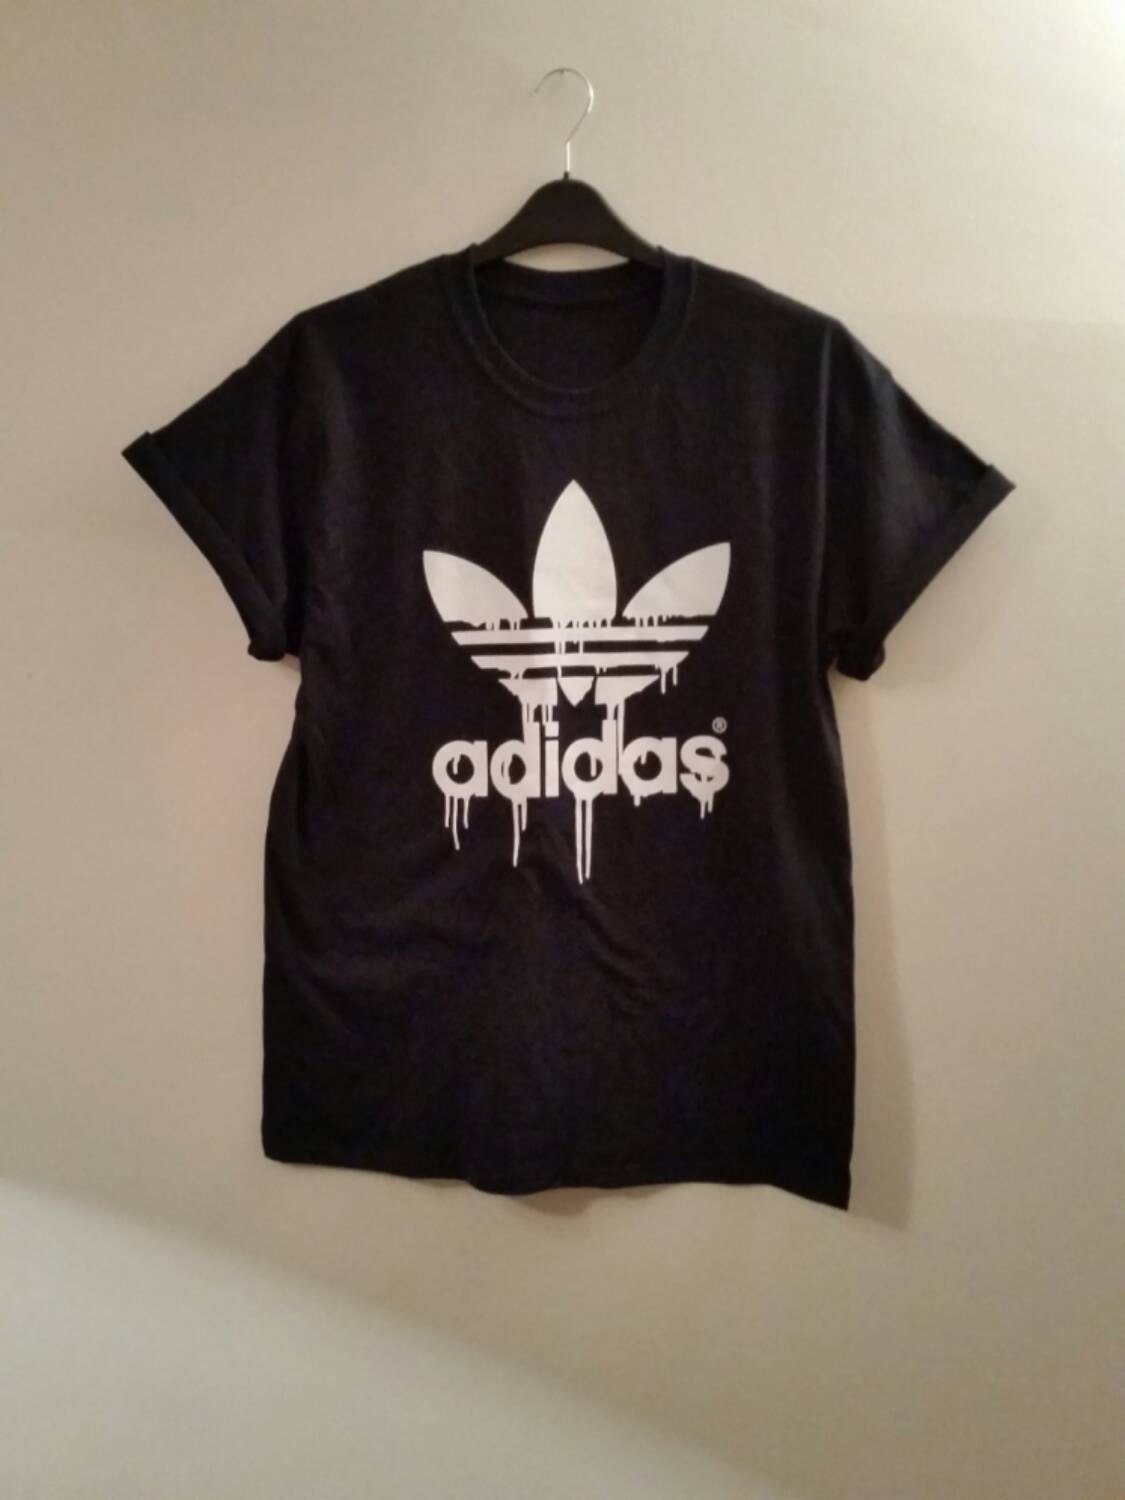 Brand new on trend dripping adidas t/shirt top unisex mens